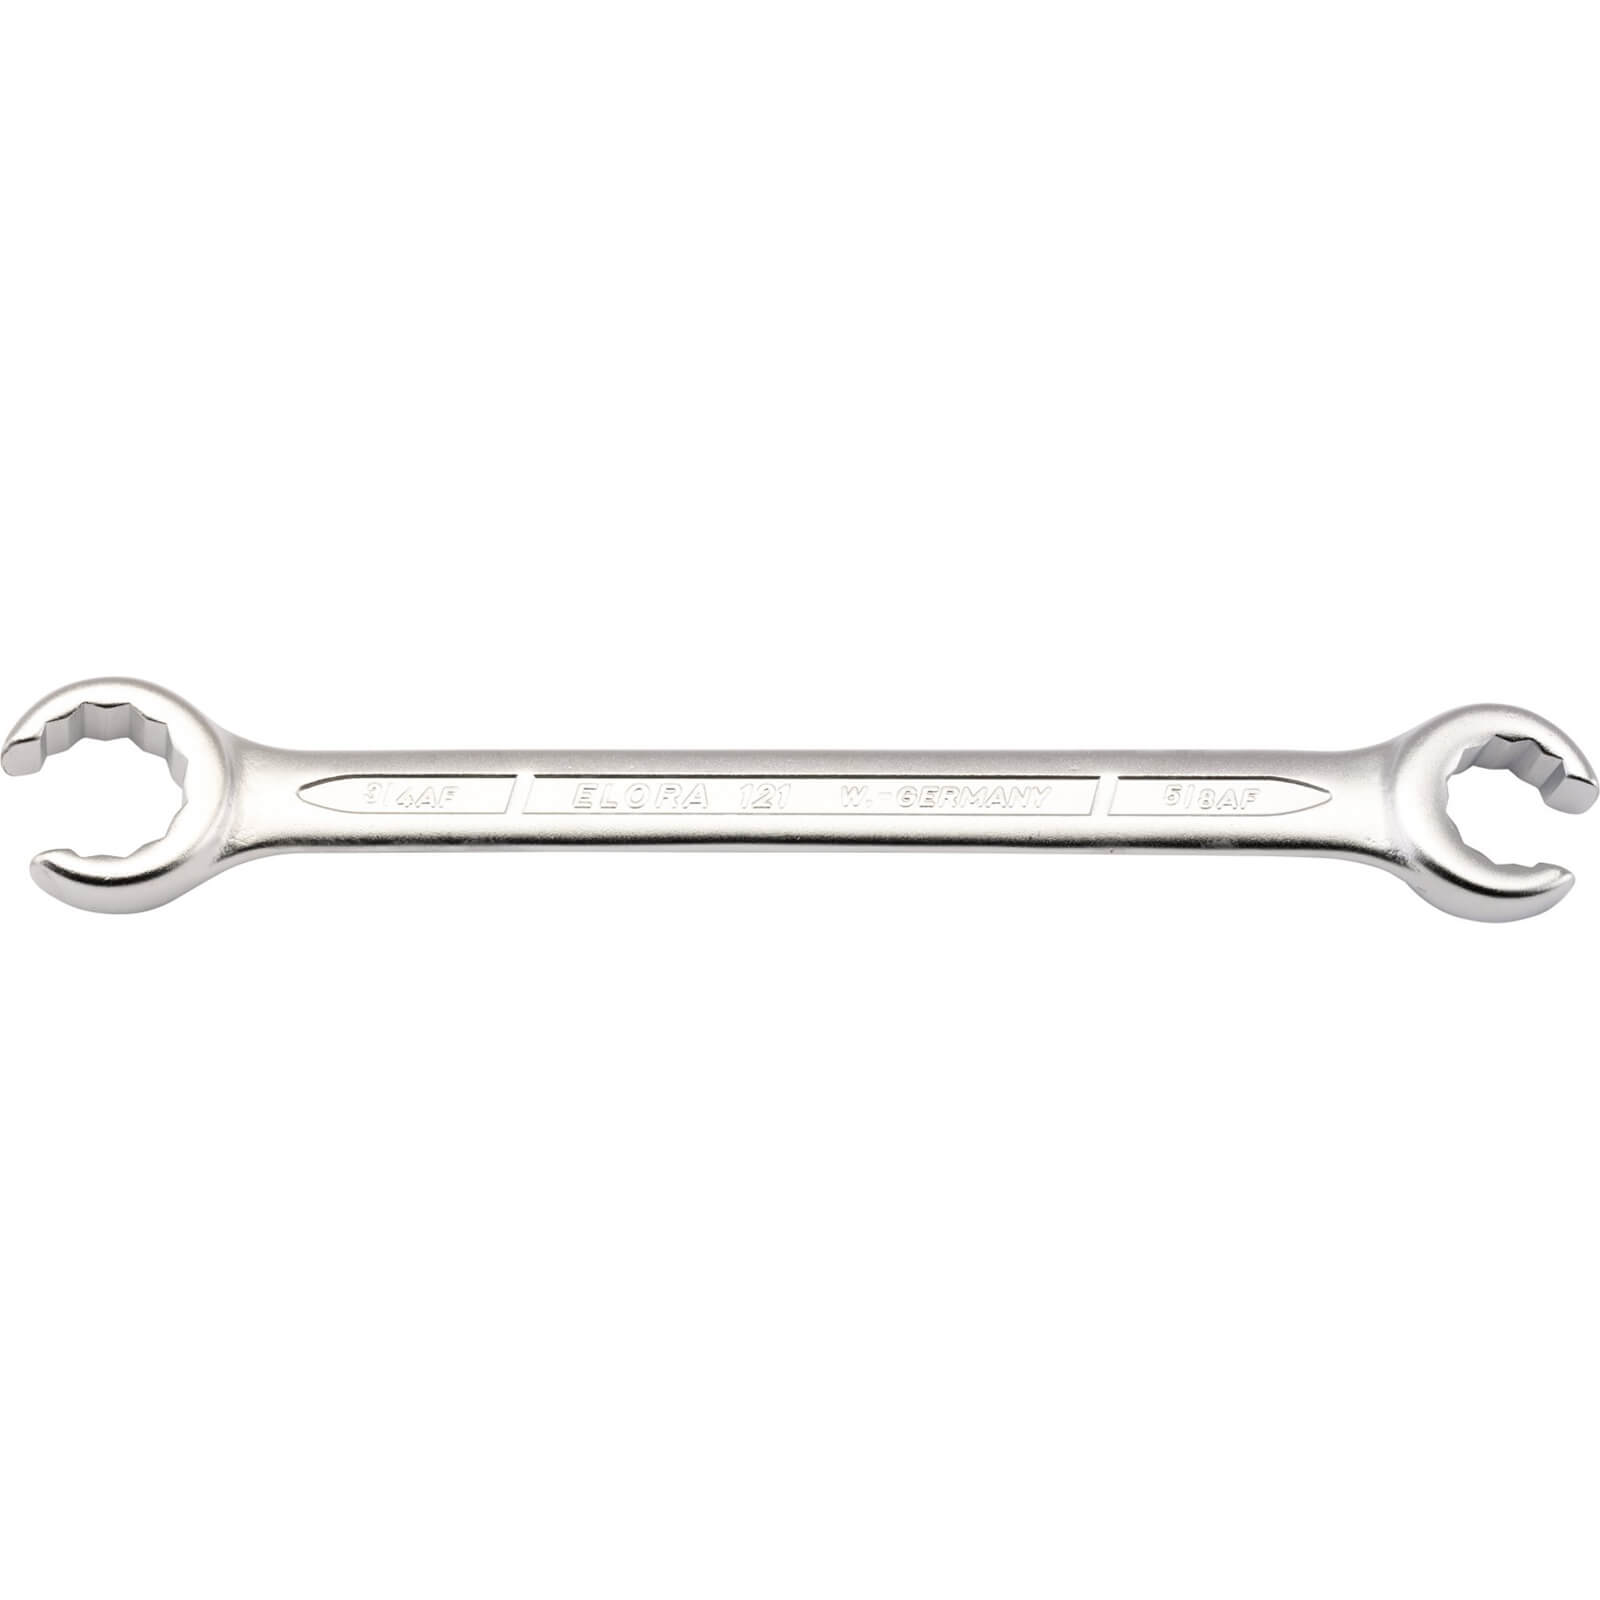 Image of Elora Flare Nut Spanner Imperial 5/8" x 3/4"